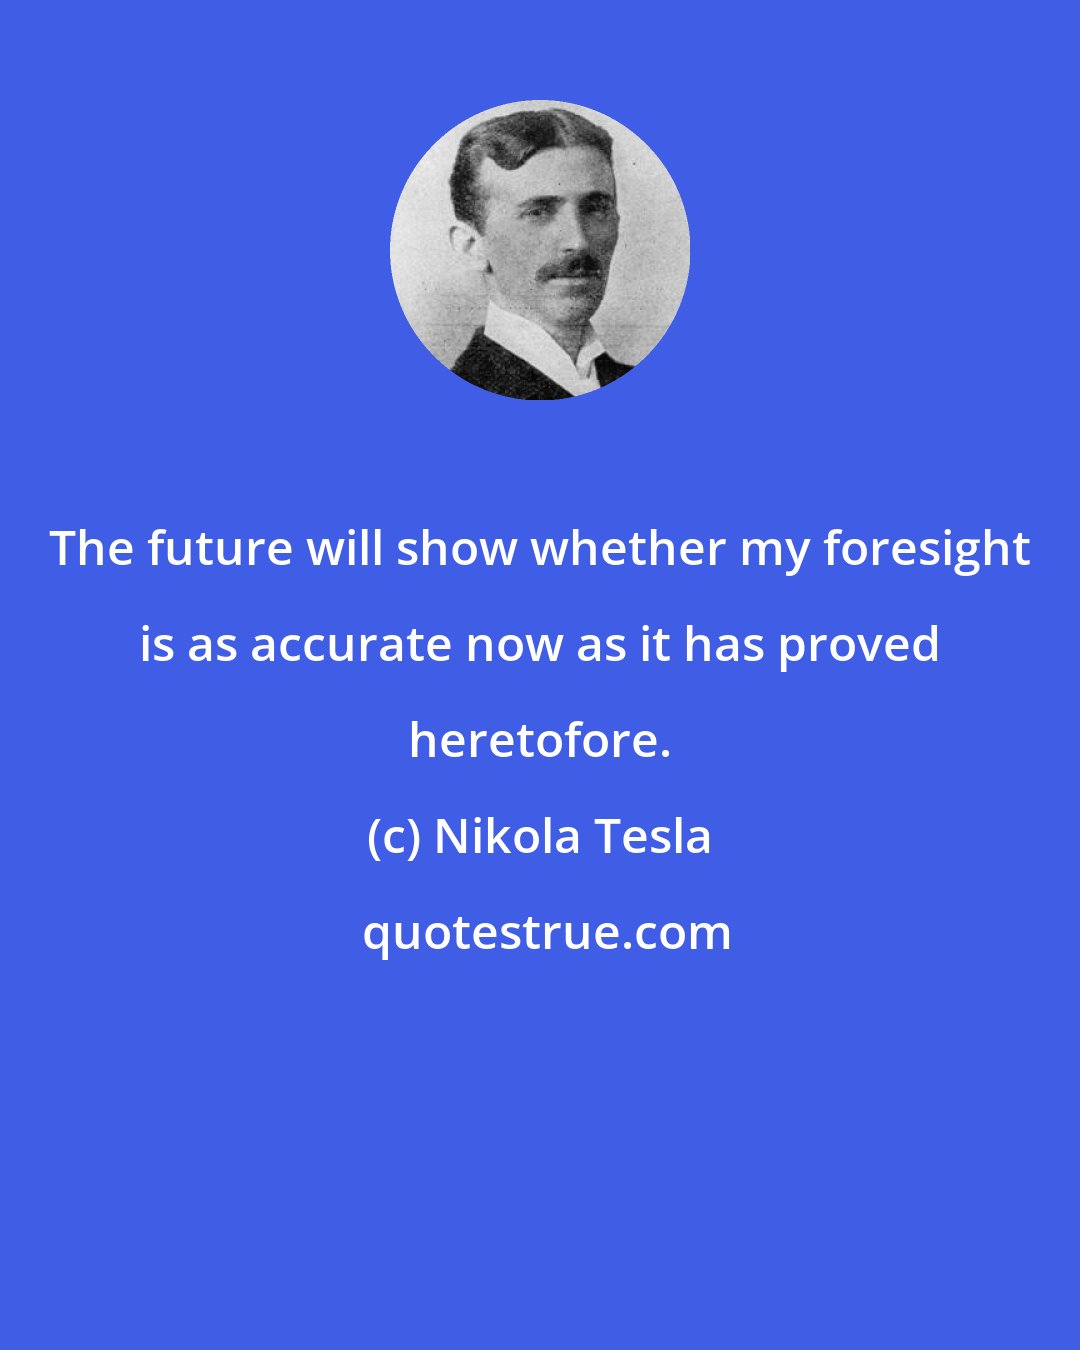 Nikola Tesla: The future will show whether my foresight is as accurate now as it has proved heretofore.